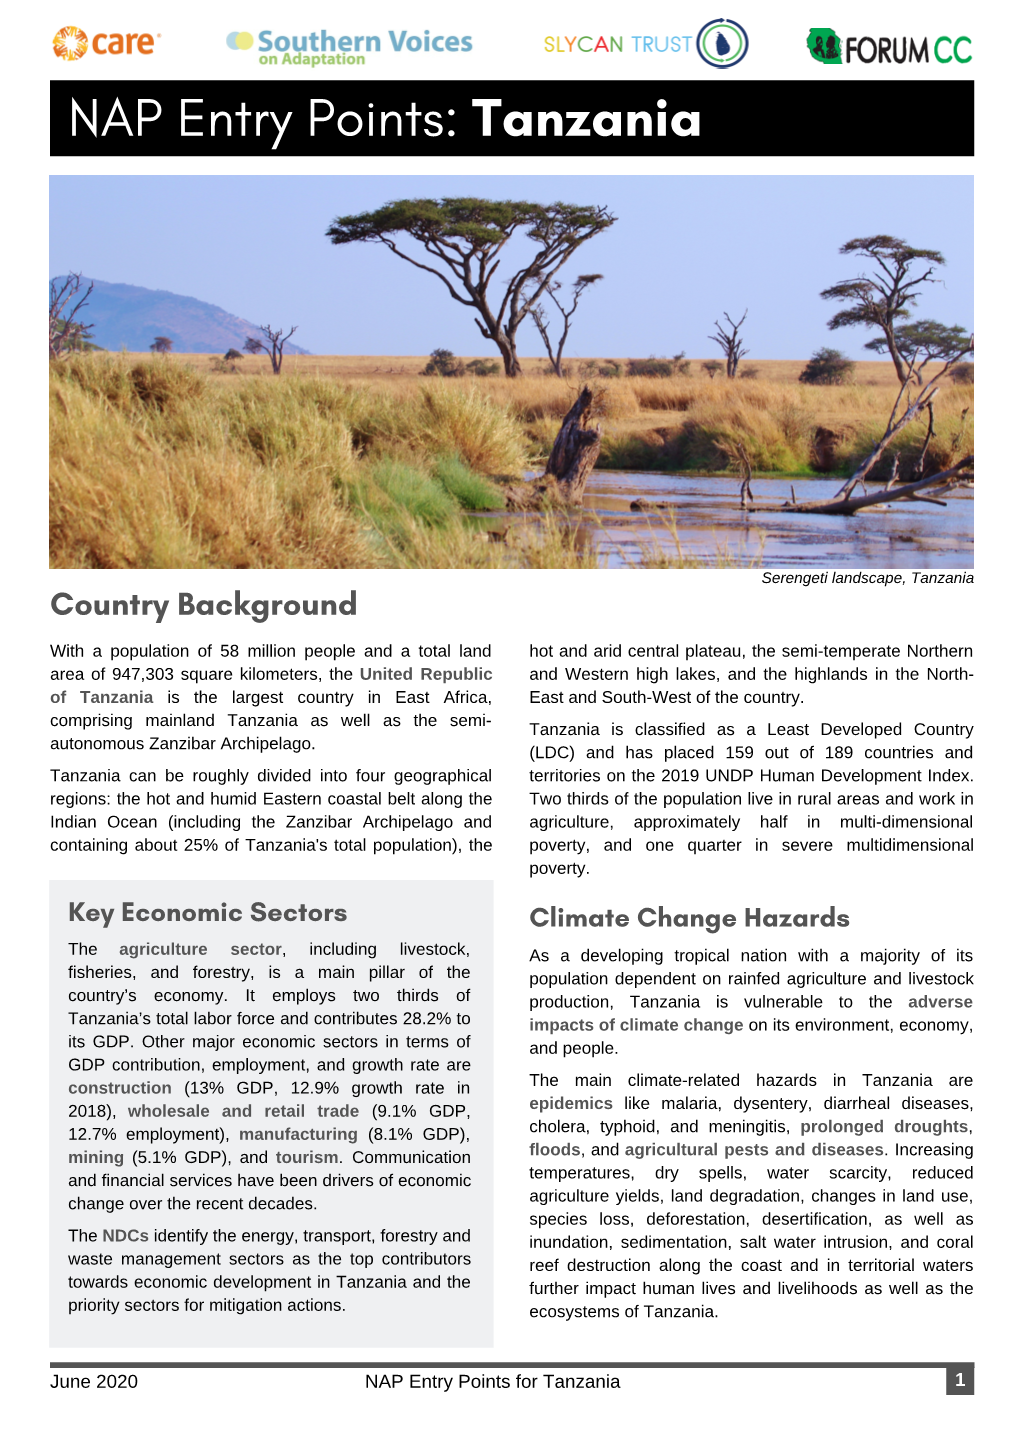 NAP Entry Points Tanzania (4-Pager)